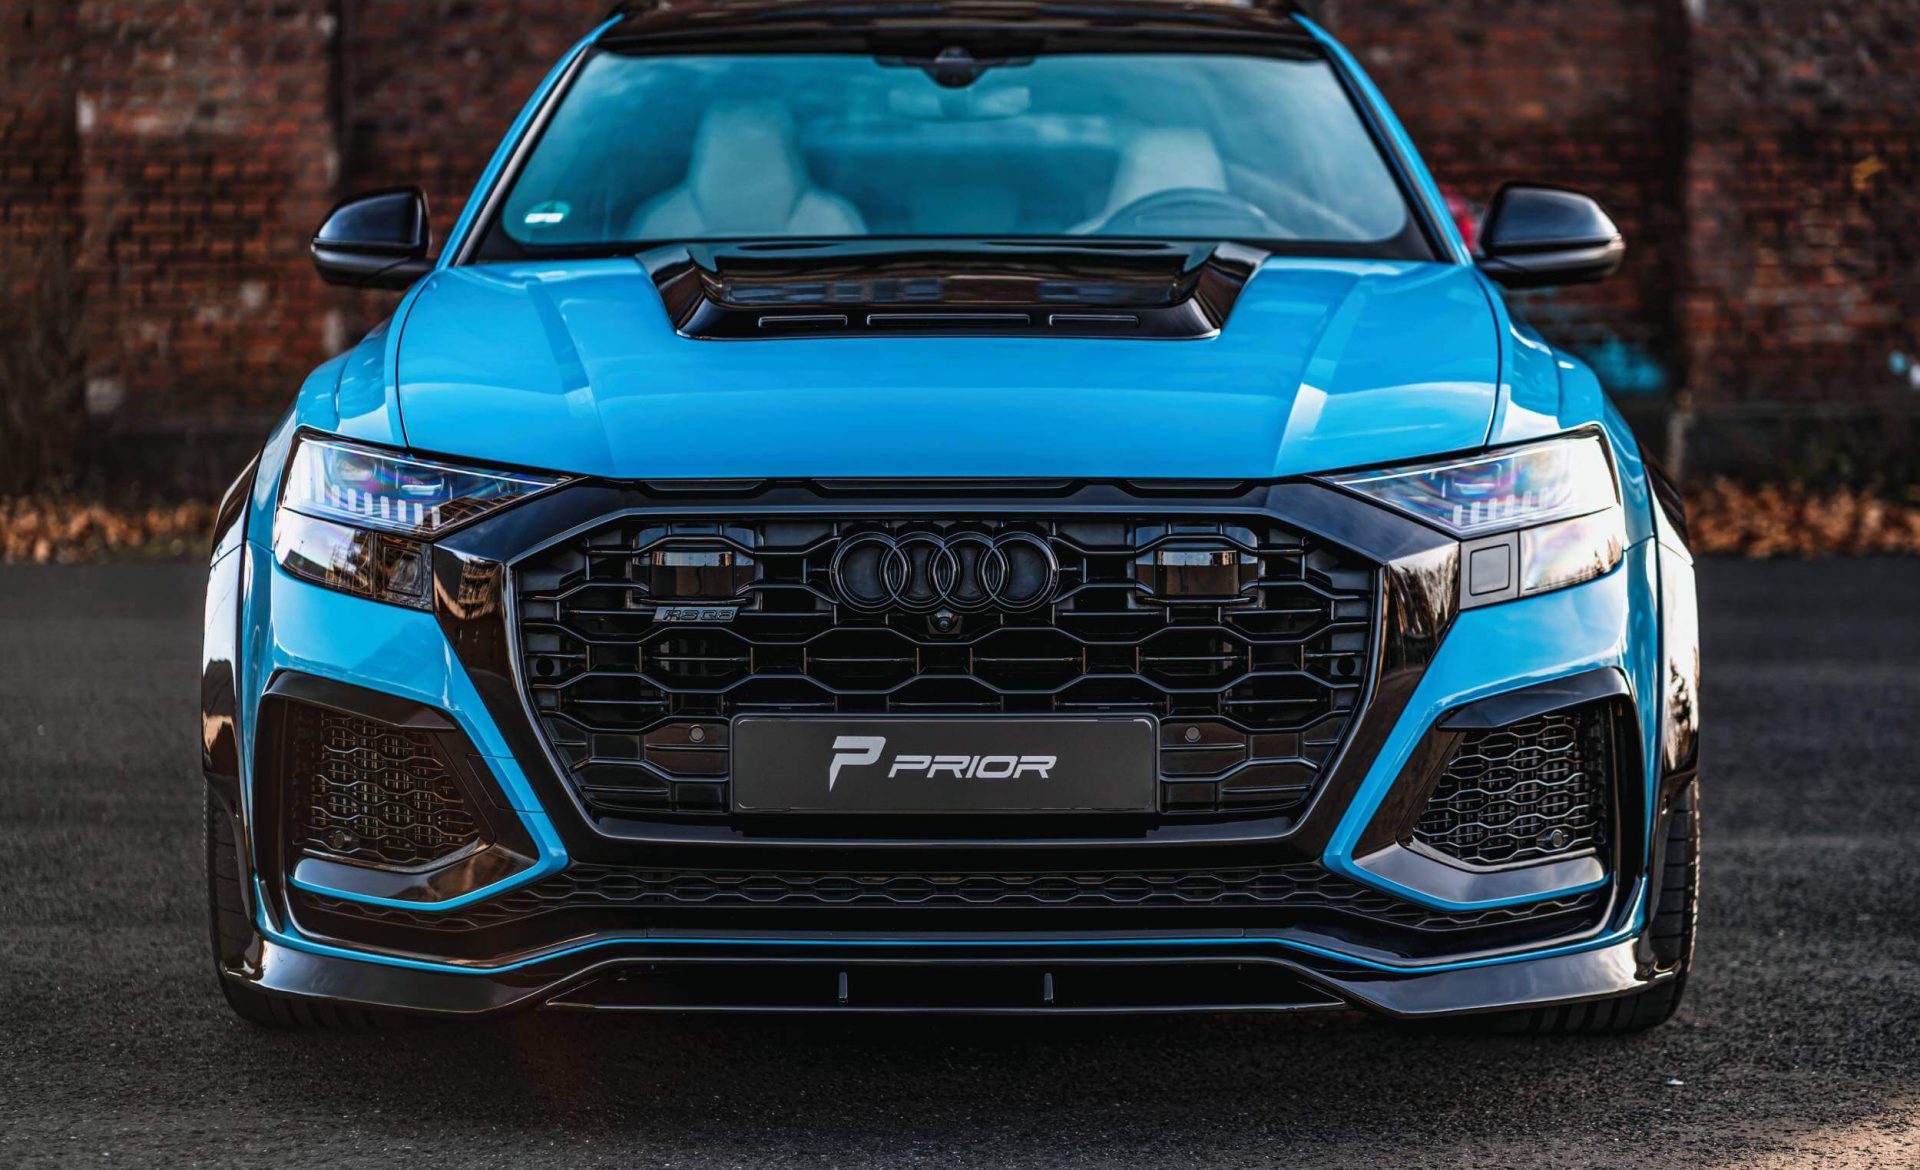 PD-RS800 Bonnet Add-On for Audi RS Q8